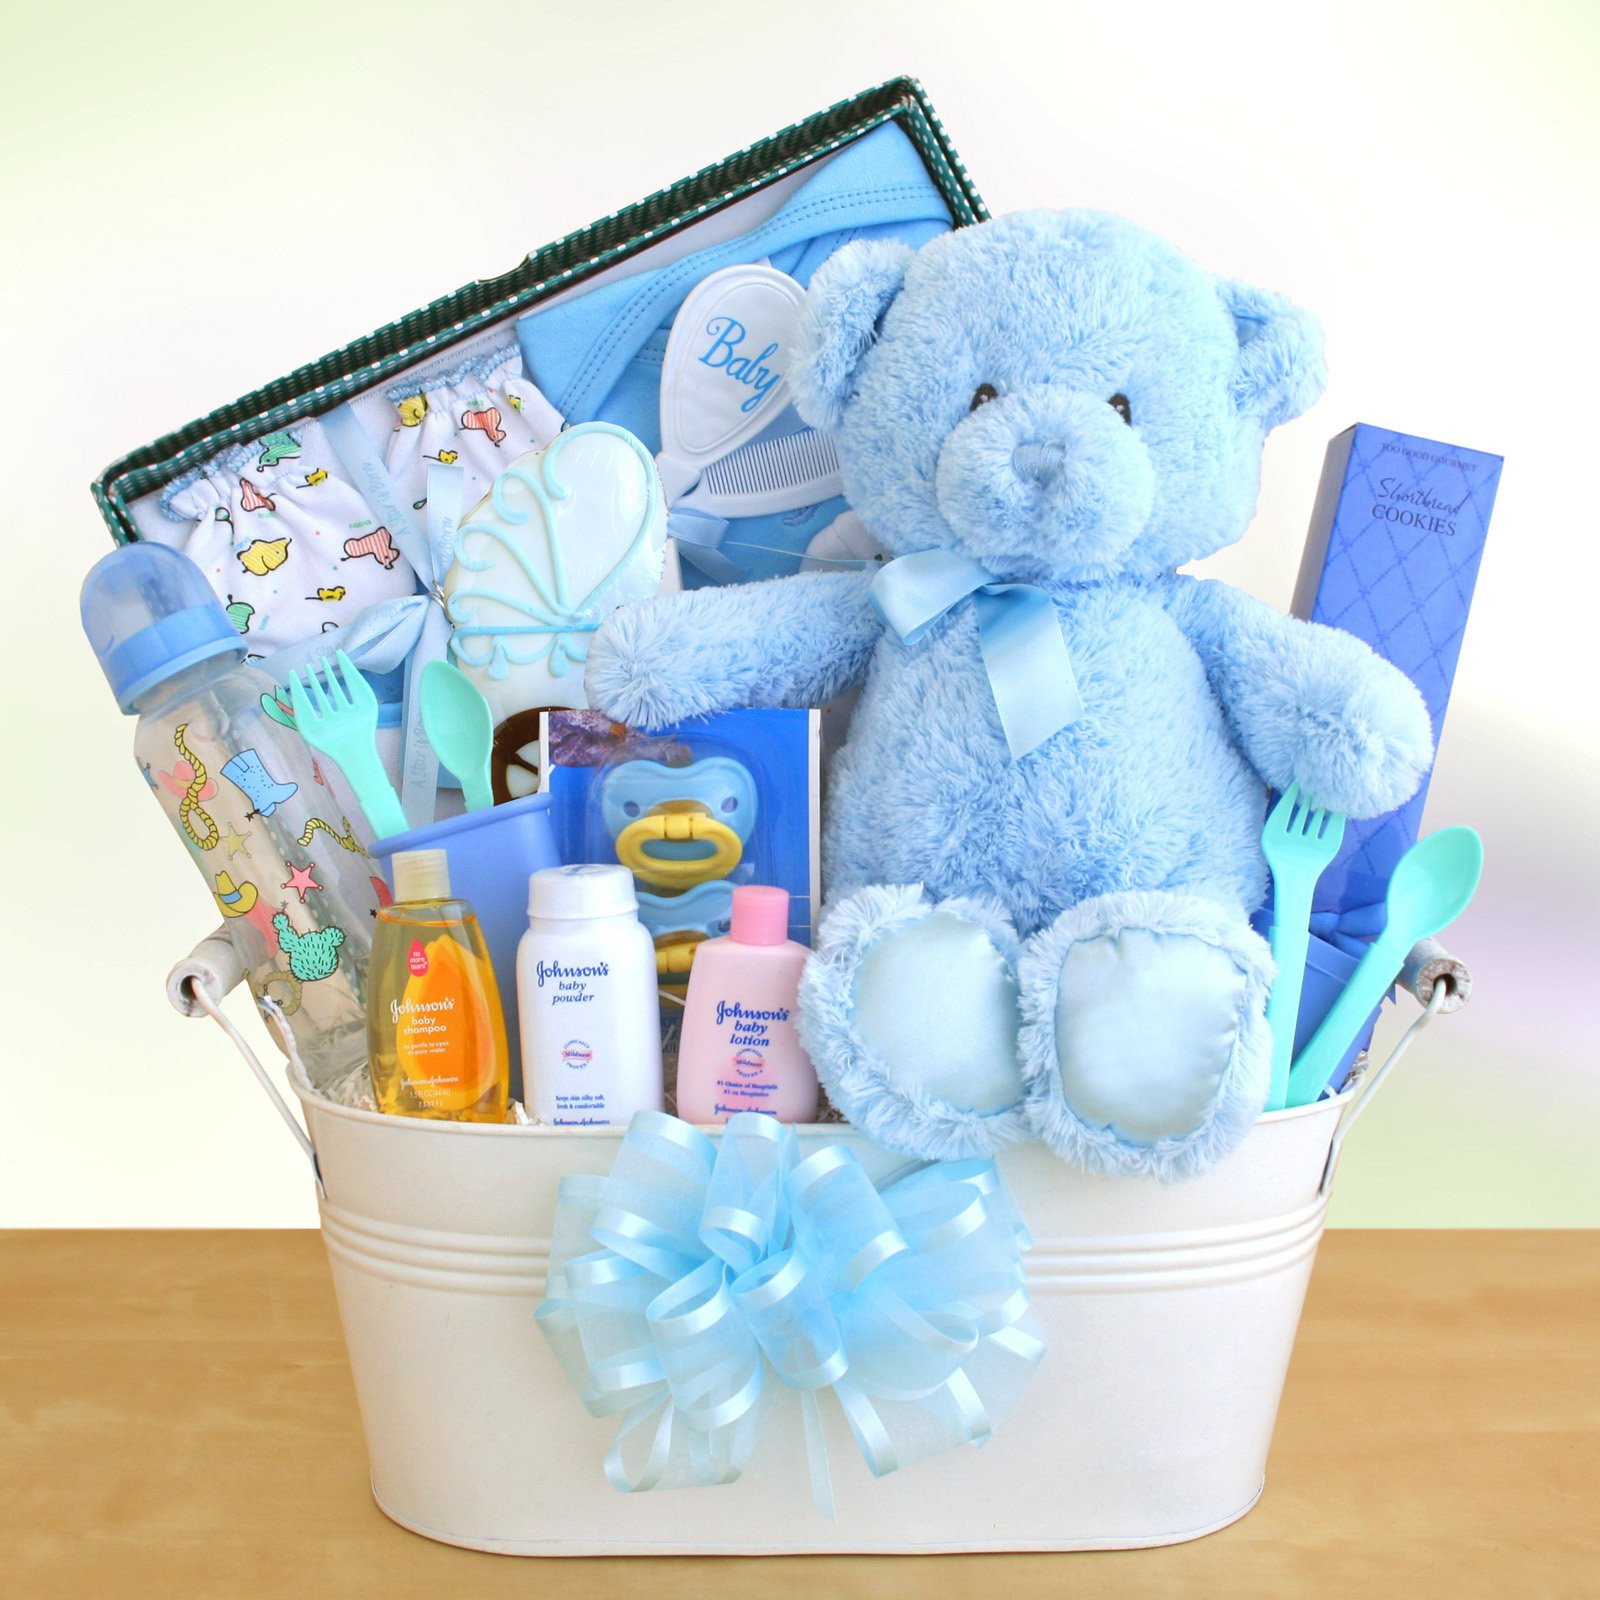 Baby Boy Baby Shower Gift Ideas
 New Arrival Baby Boy Gift Basket Gift Baskets by